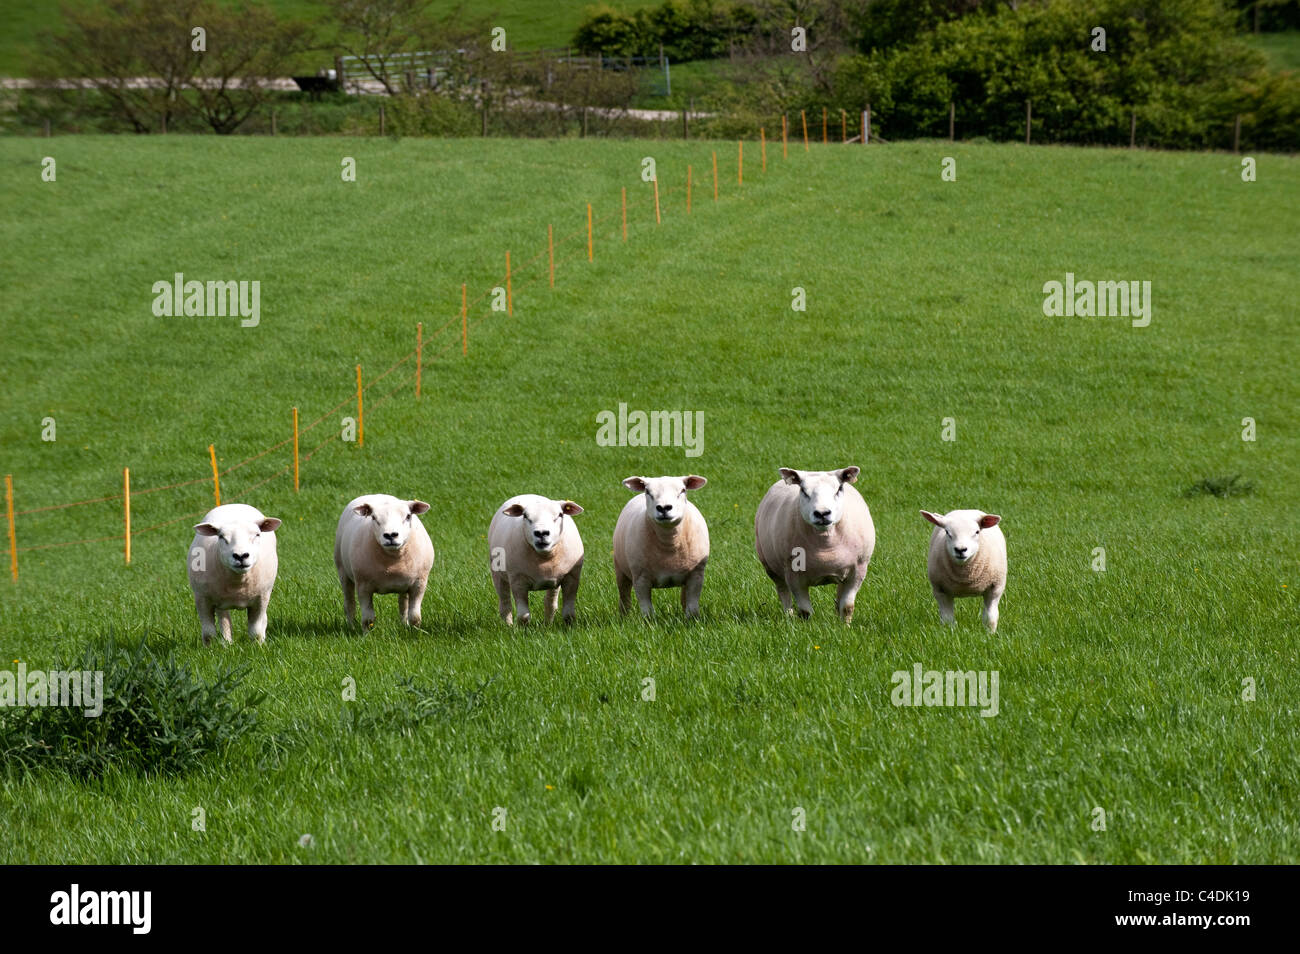 Texel sheep and lambs in field with electric fence in. Stock Photo